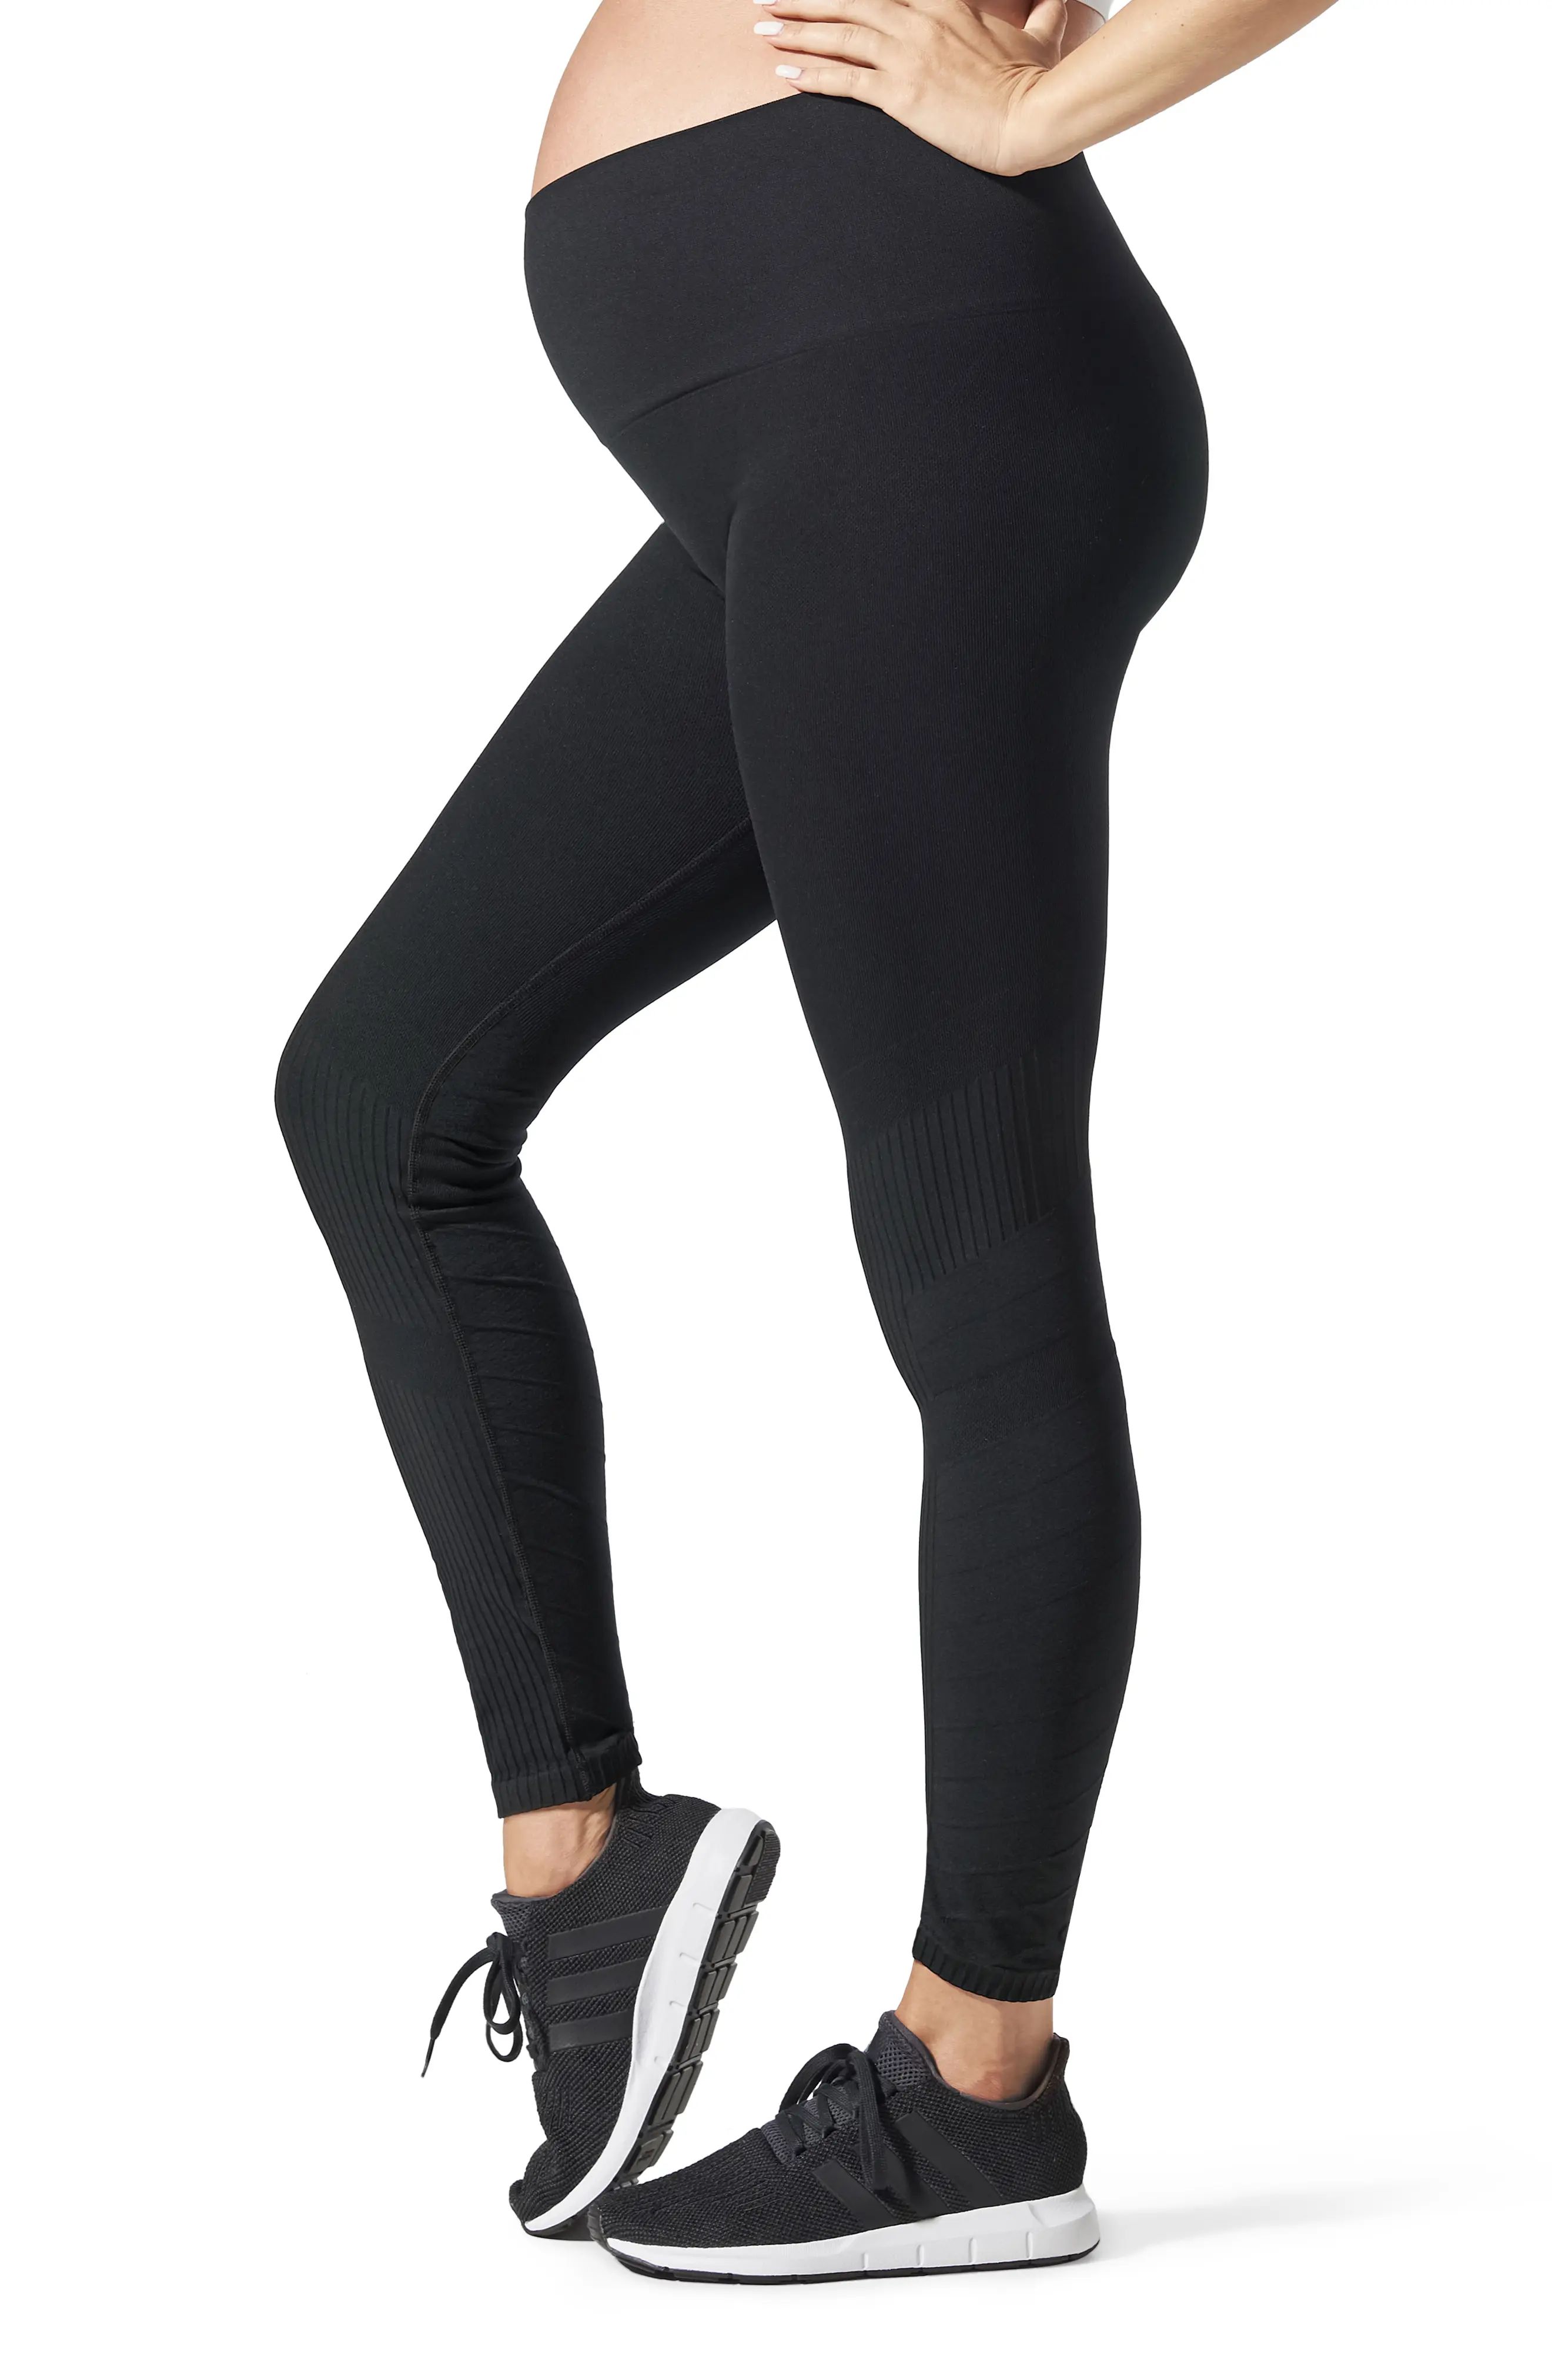 BLANQI SportSupport® Hipster Contour Support Maternity/Postpartum Leggings | Nordstrom